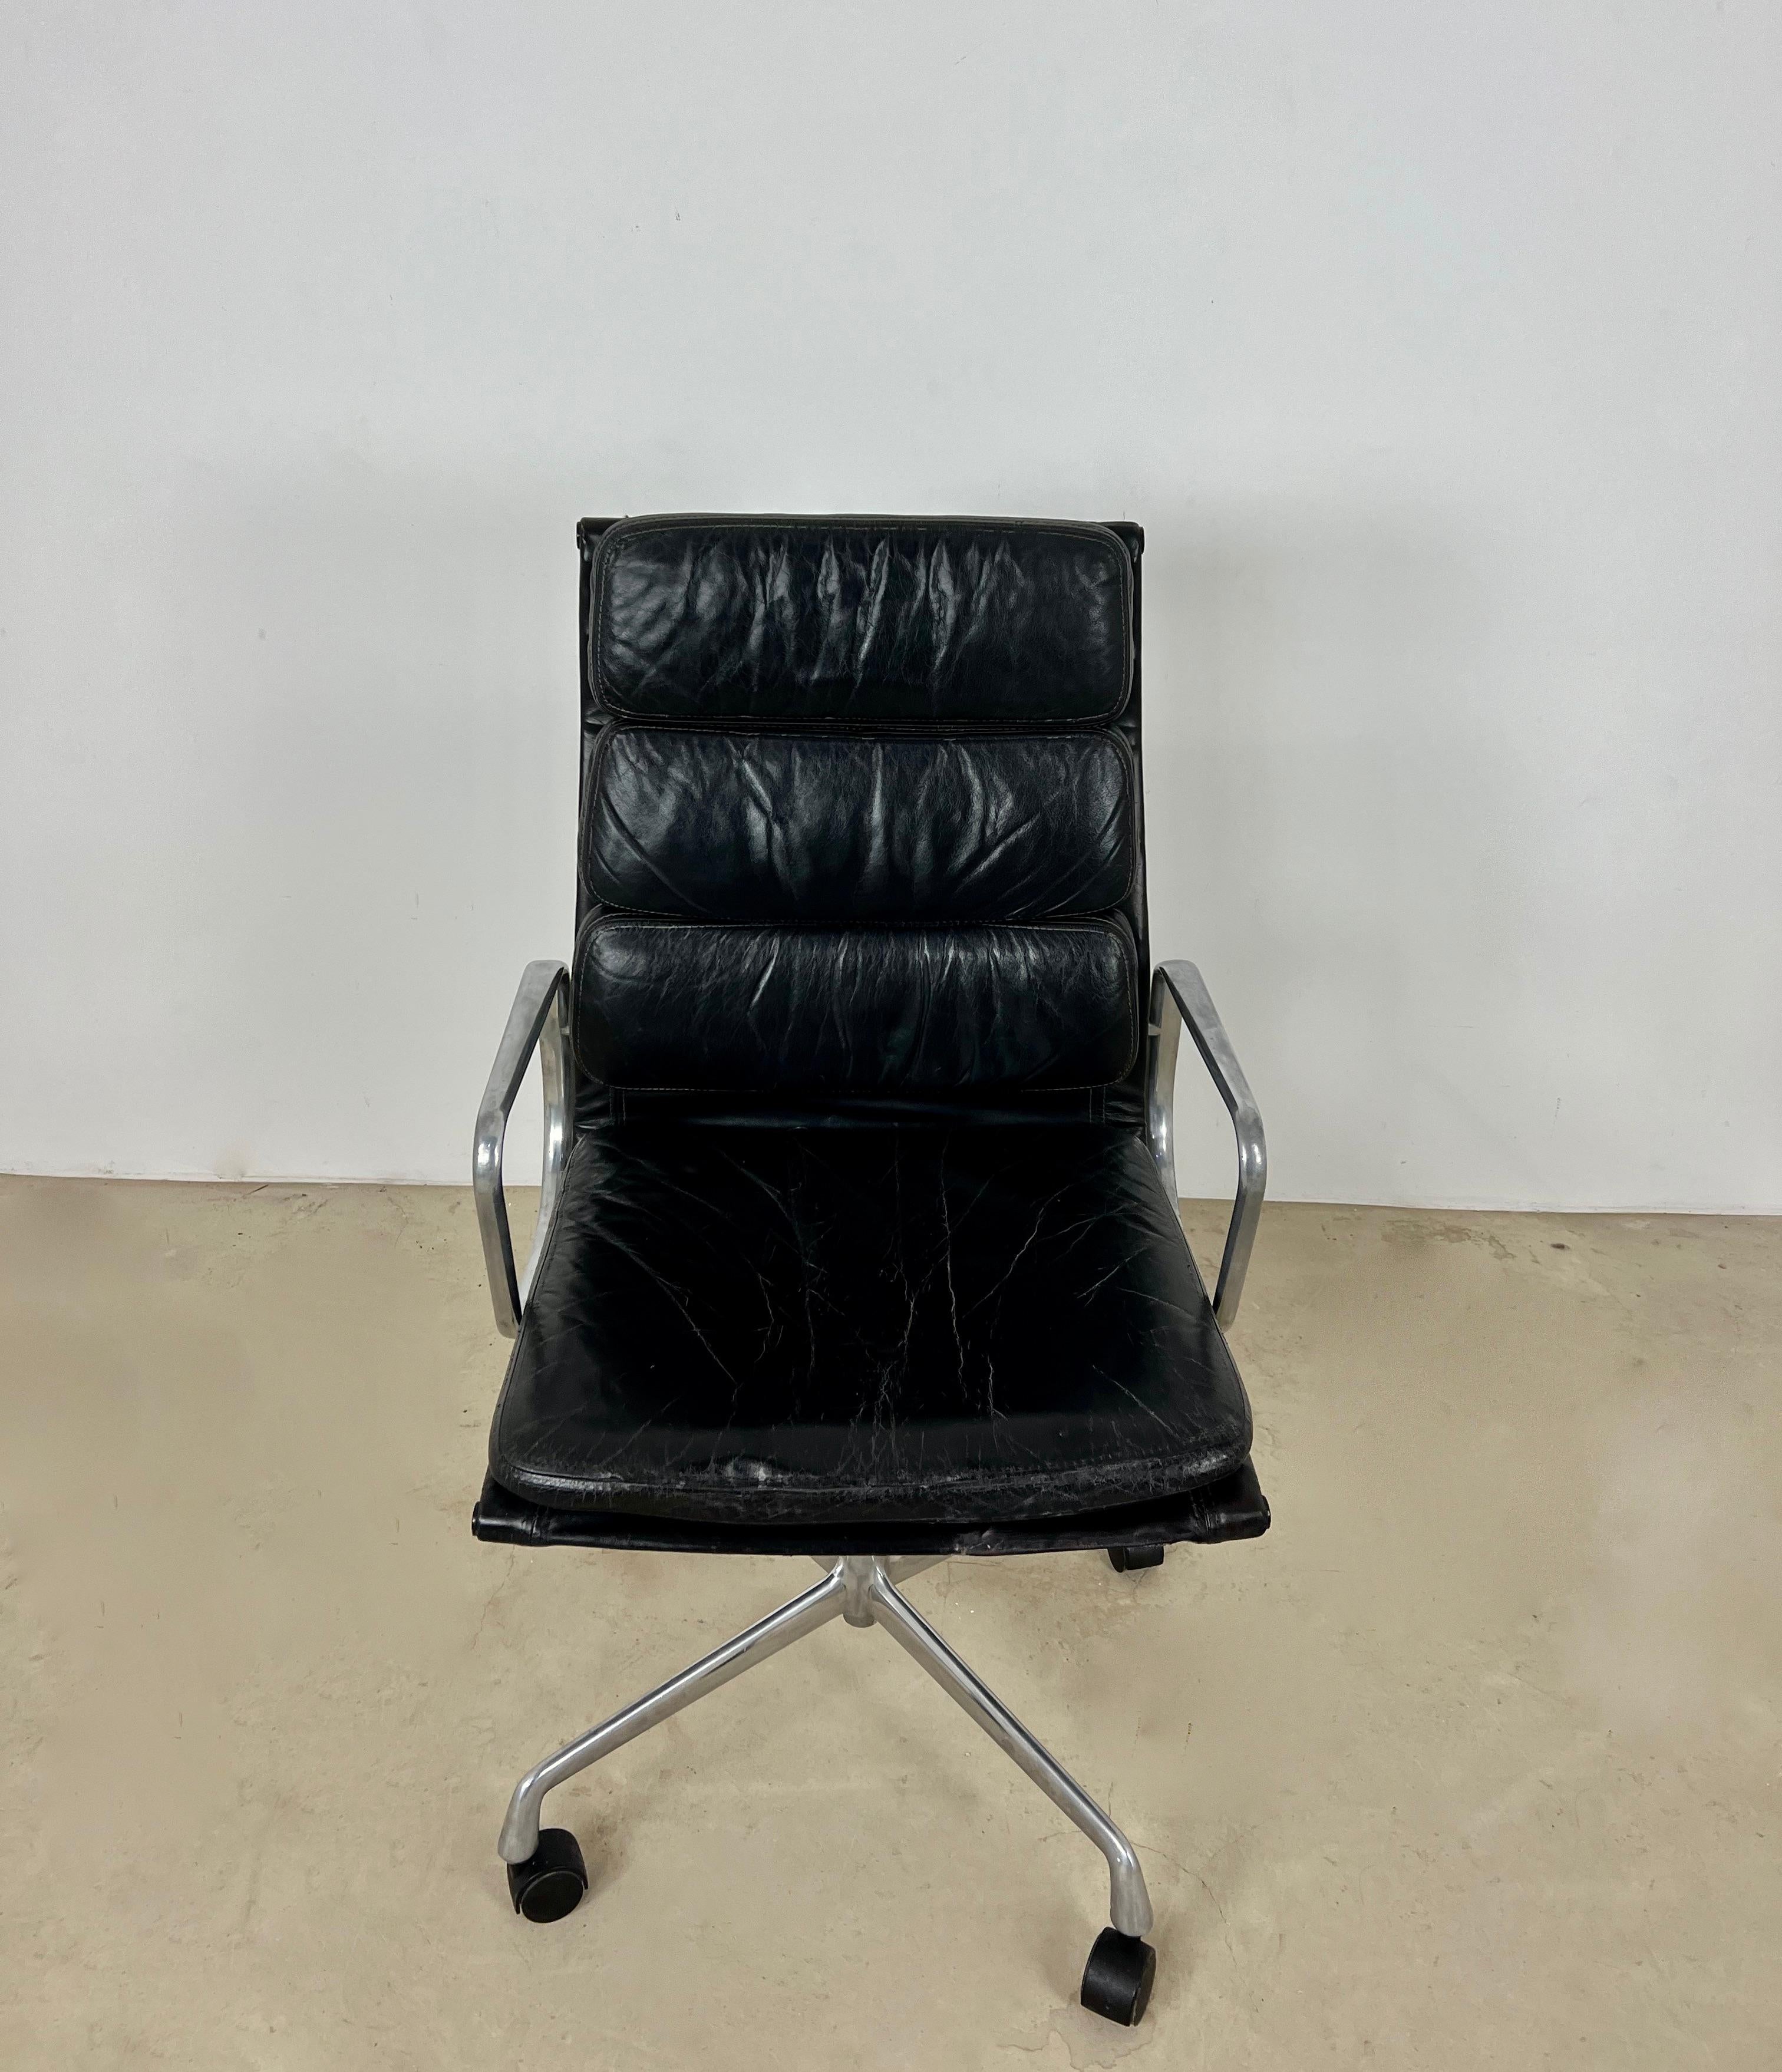 Central American Ea 216 Soft Pad Desk Chair by Charles & Ray Eames for ICF, 1970s